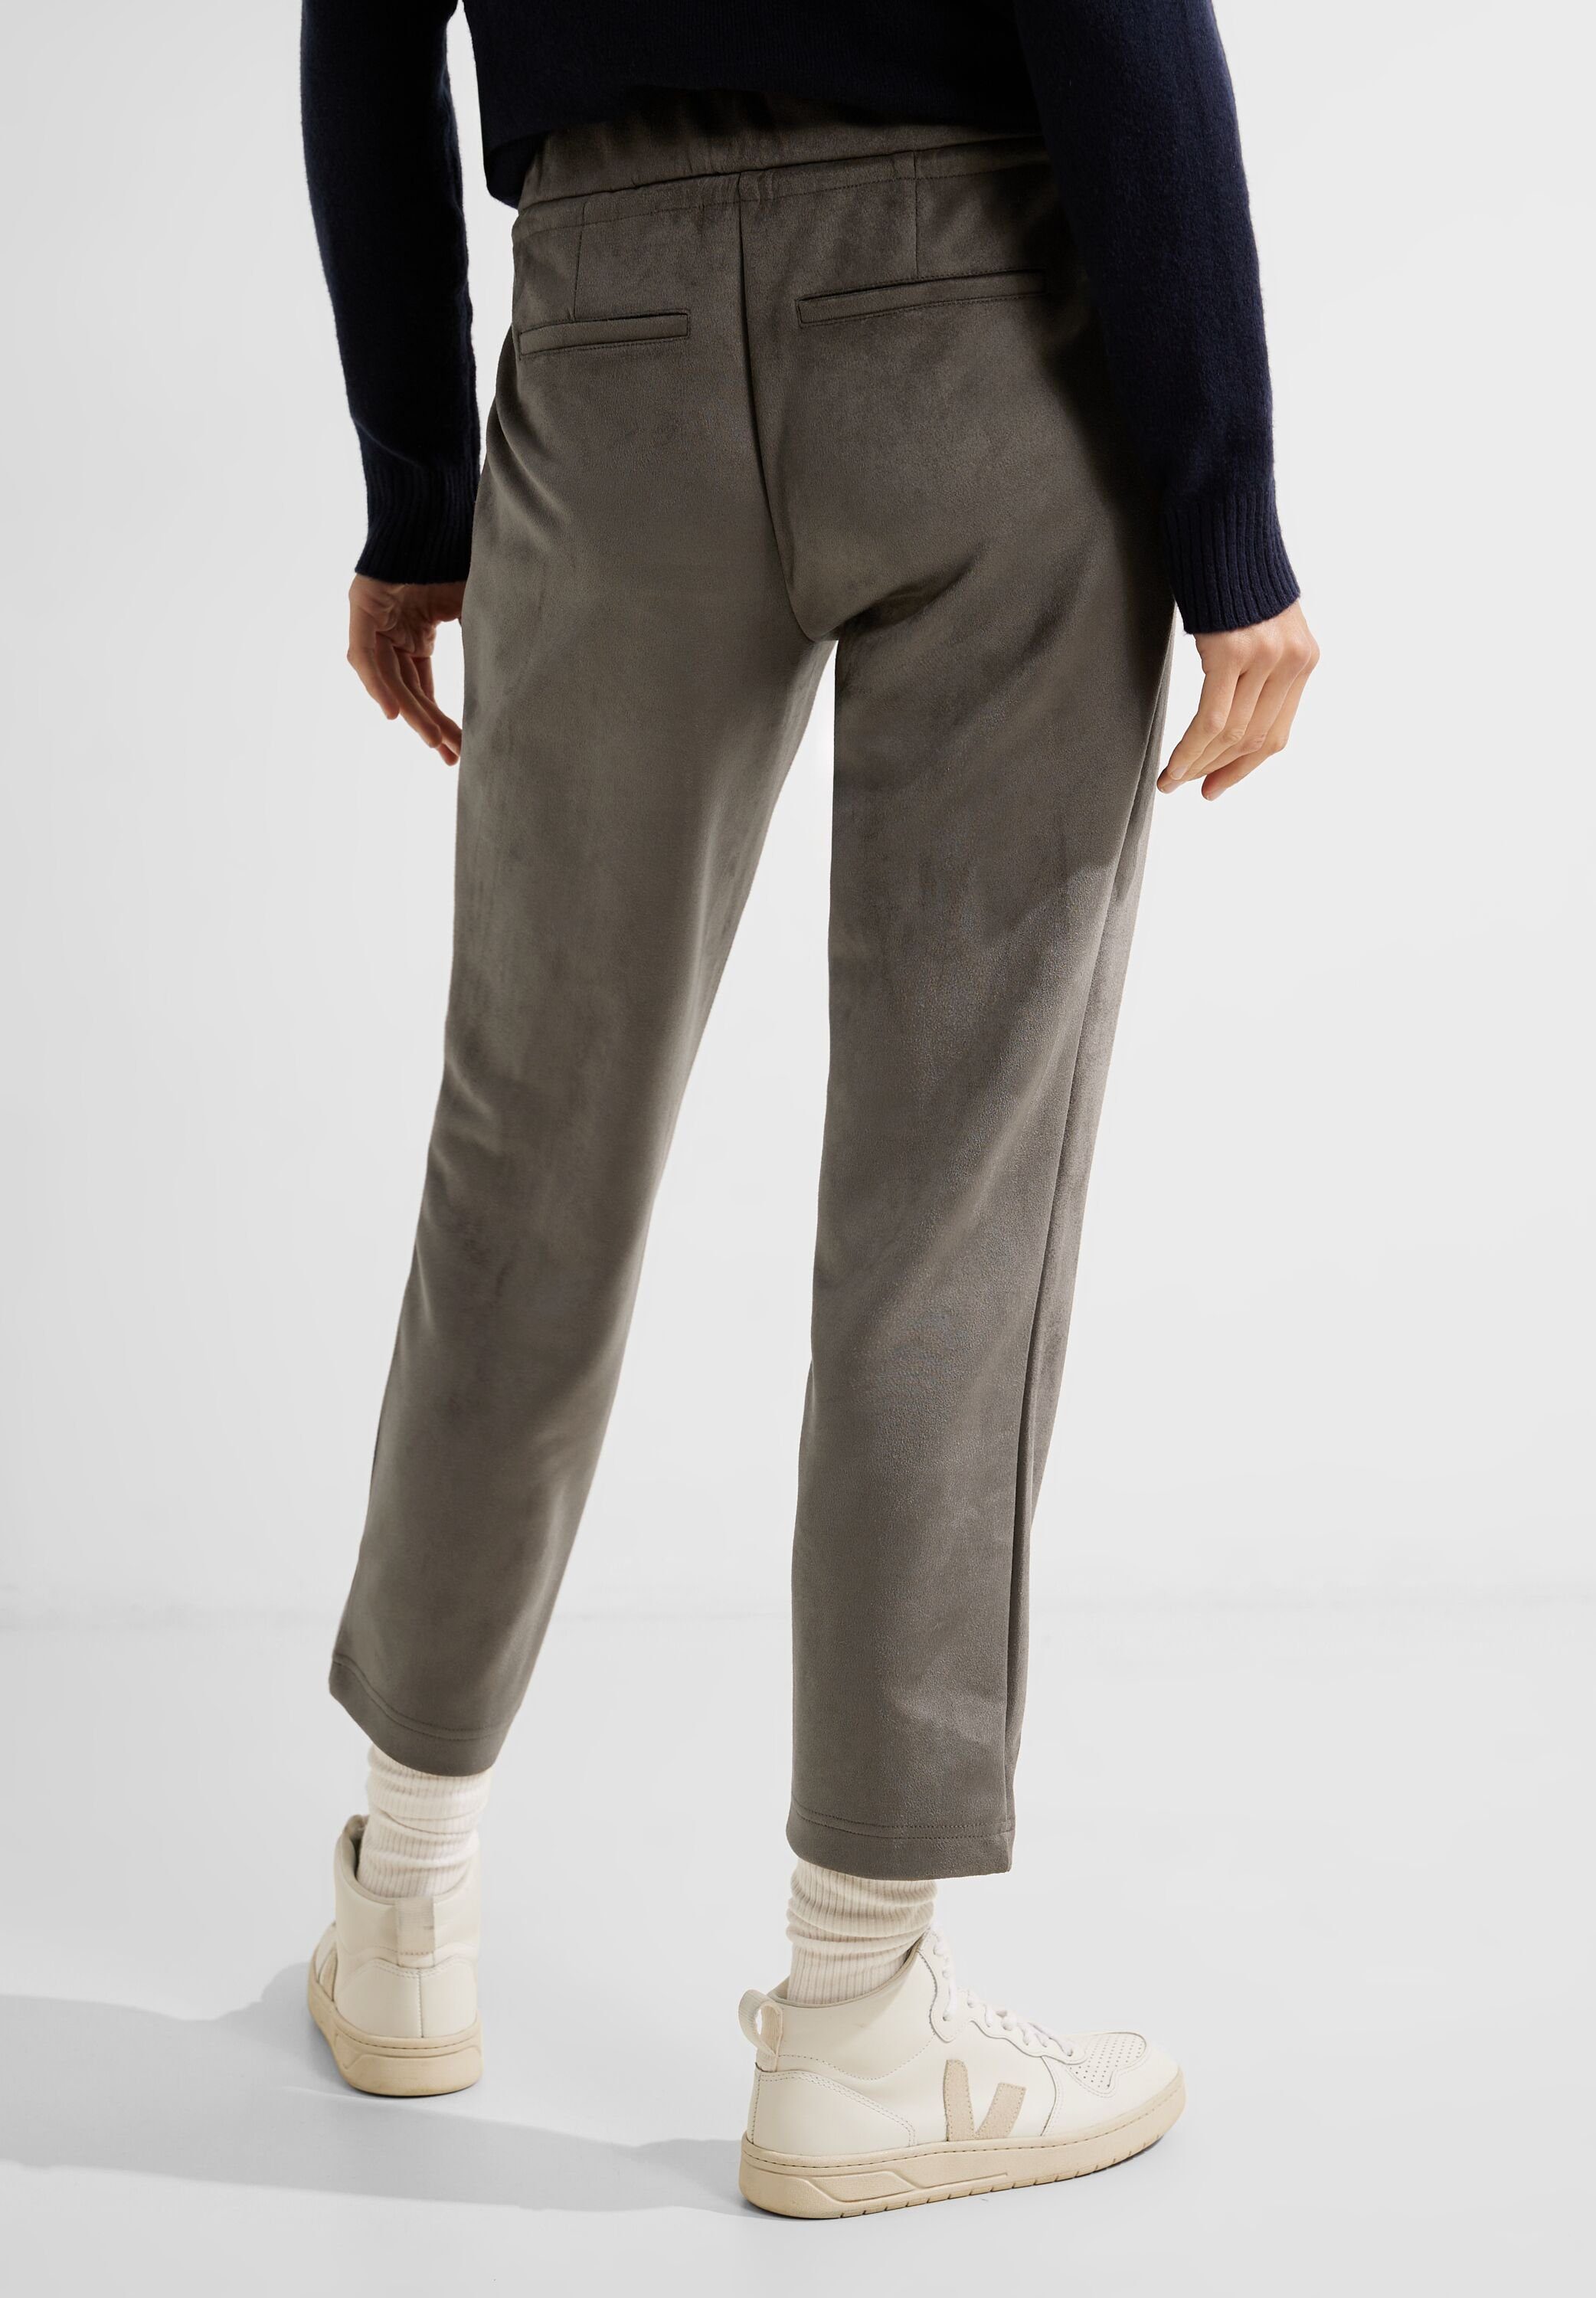 Tracey Style Cecil Jogger Velourshose Pants